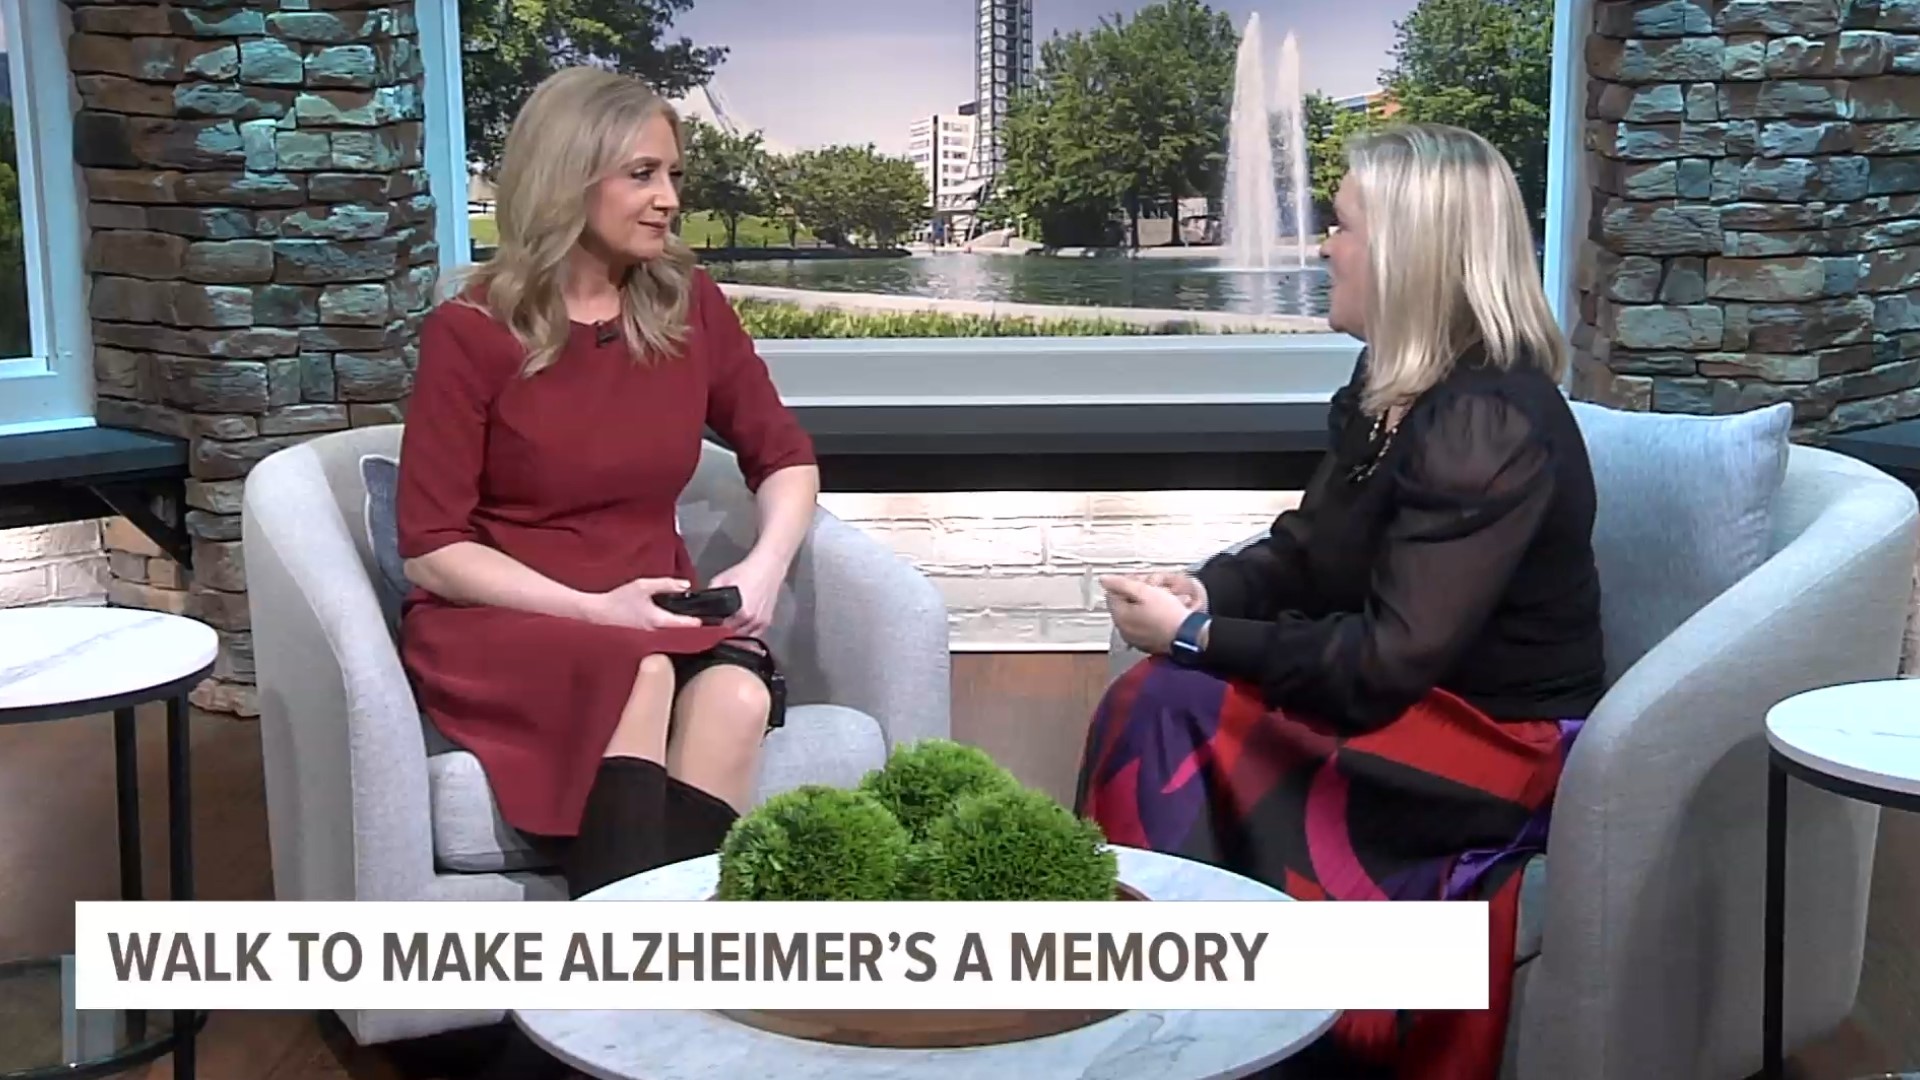 In Tennessee, around 120,000 people are living with Alzheimer's.